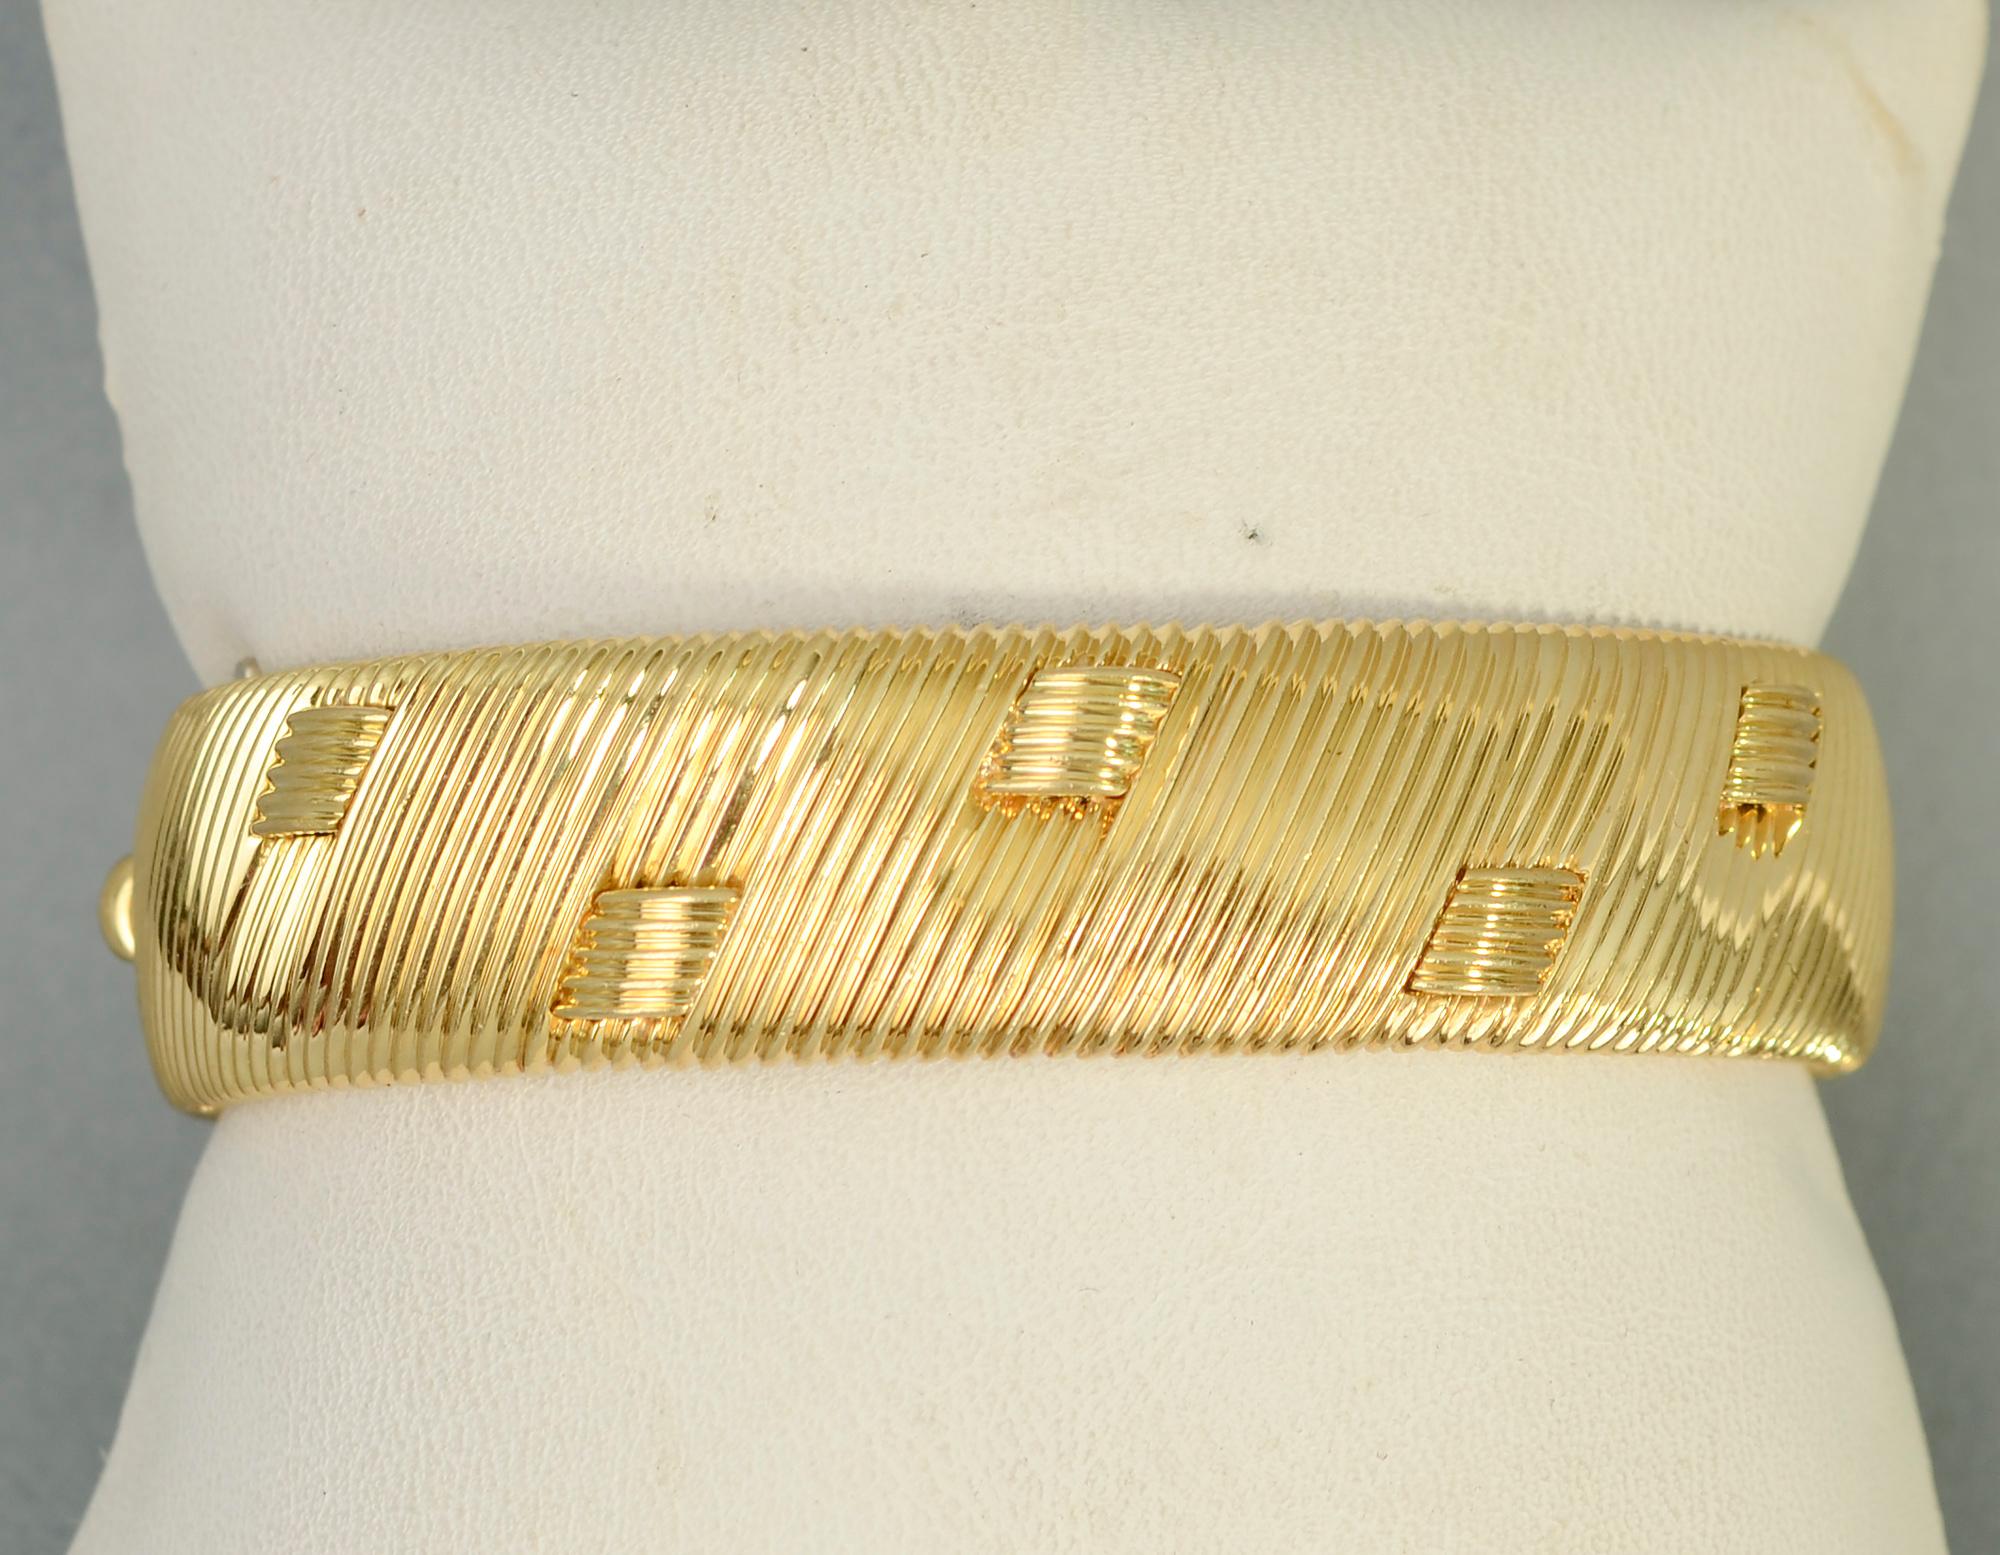 This hinged bangle bracelet by Roberto Coin is a most unusual design for him. Scored diagonal lines of gold are interspersed with small curved bands that appear as though they are woven through the gold.
The bracelet is 9/16